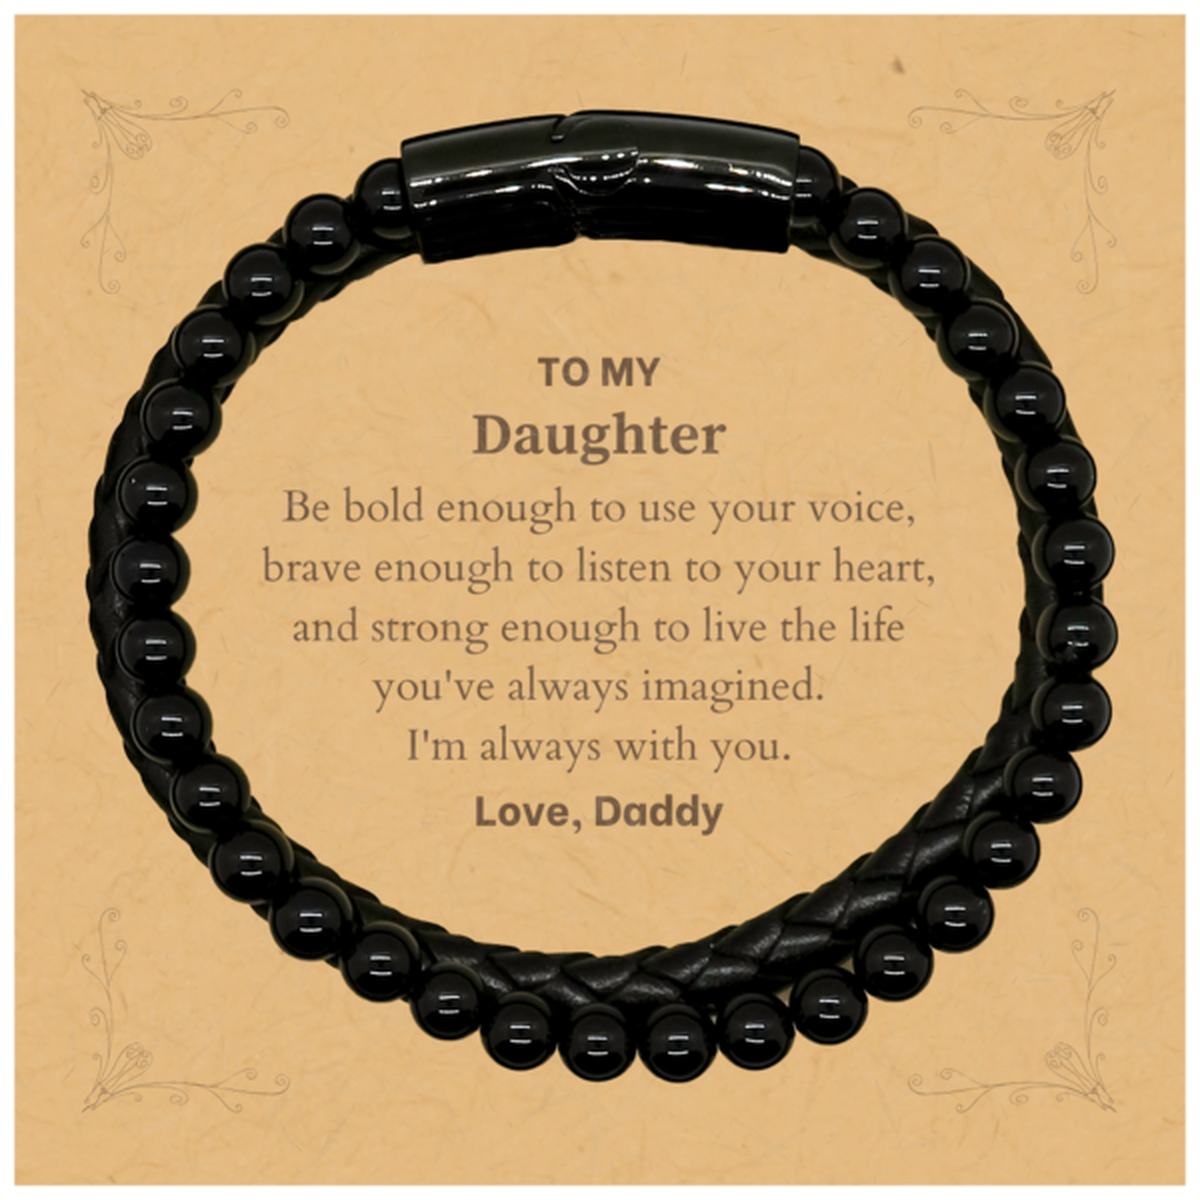 Keepsake Daughter Stone Leather Bracelets Gift Idea Graduation Christmas Birthday Daughter from Daddy, Daughter Be bold enough to use your voice, brave enough to listen to your heart. Love, Daddy